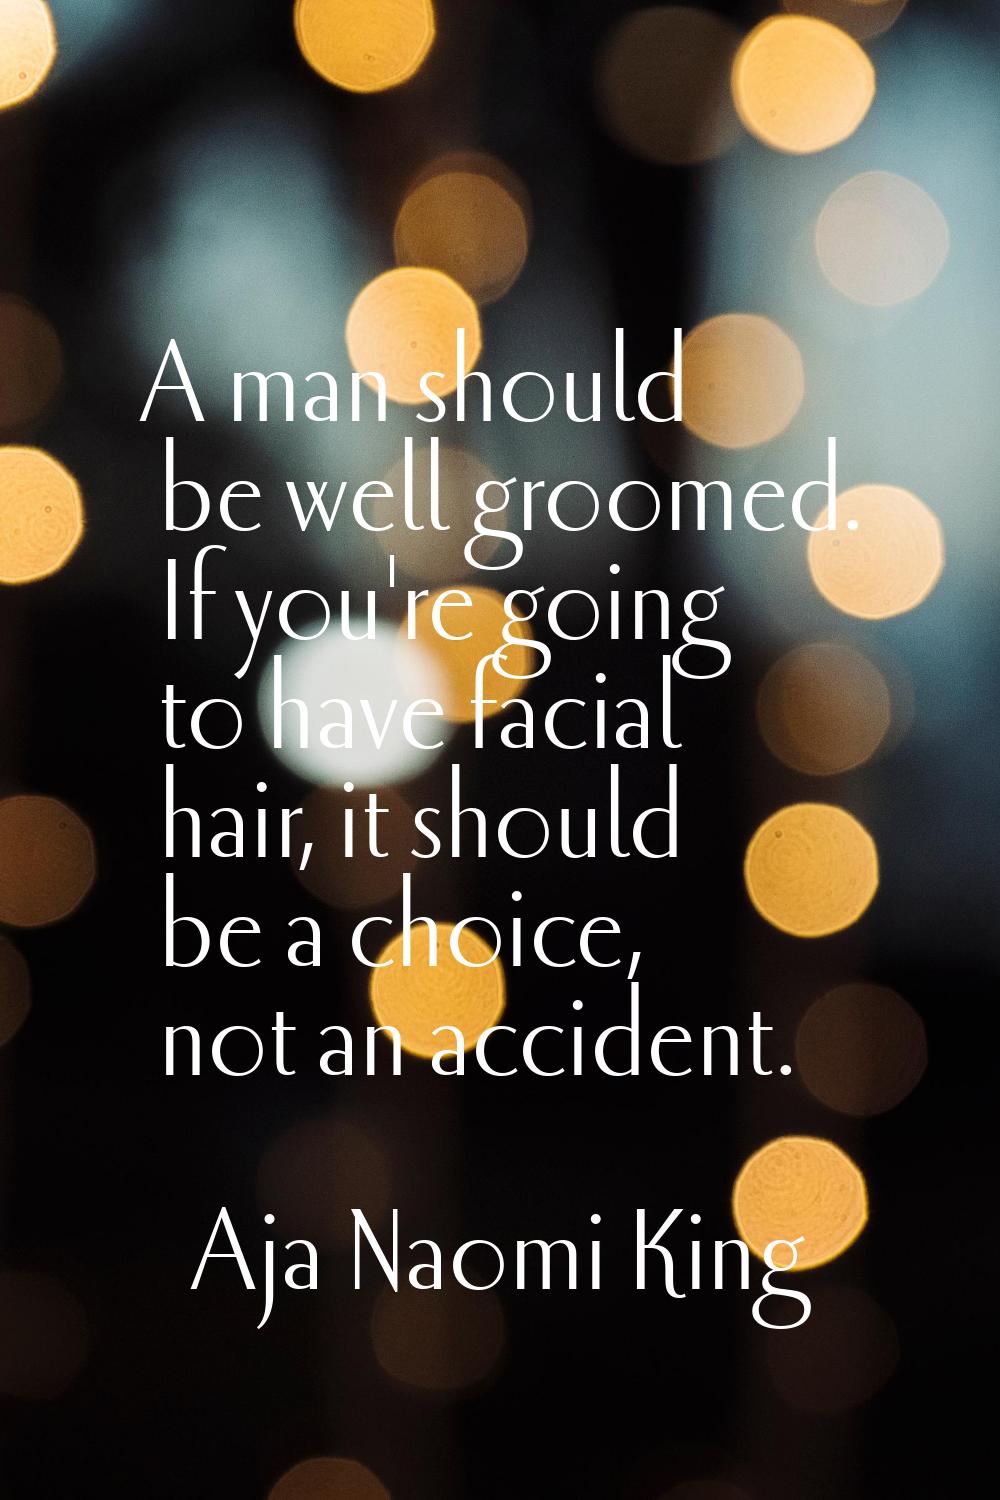 A man should be well groomed. If you're going to have facial hair, it should be a choice, not an ac